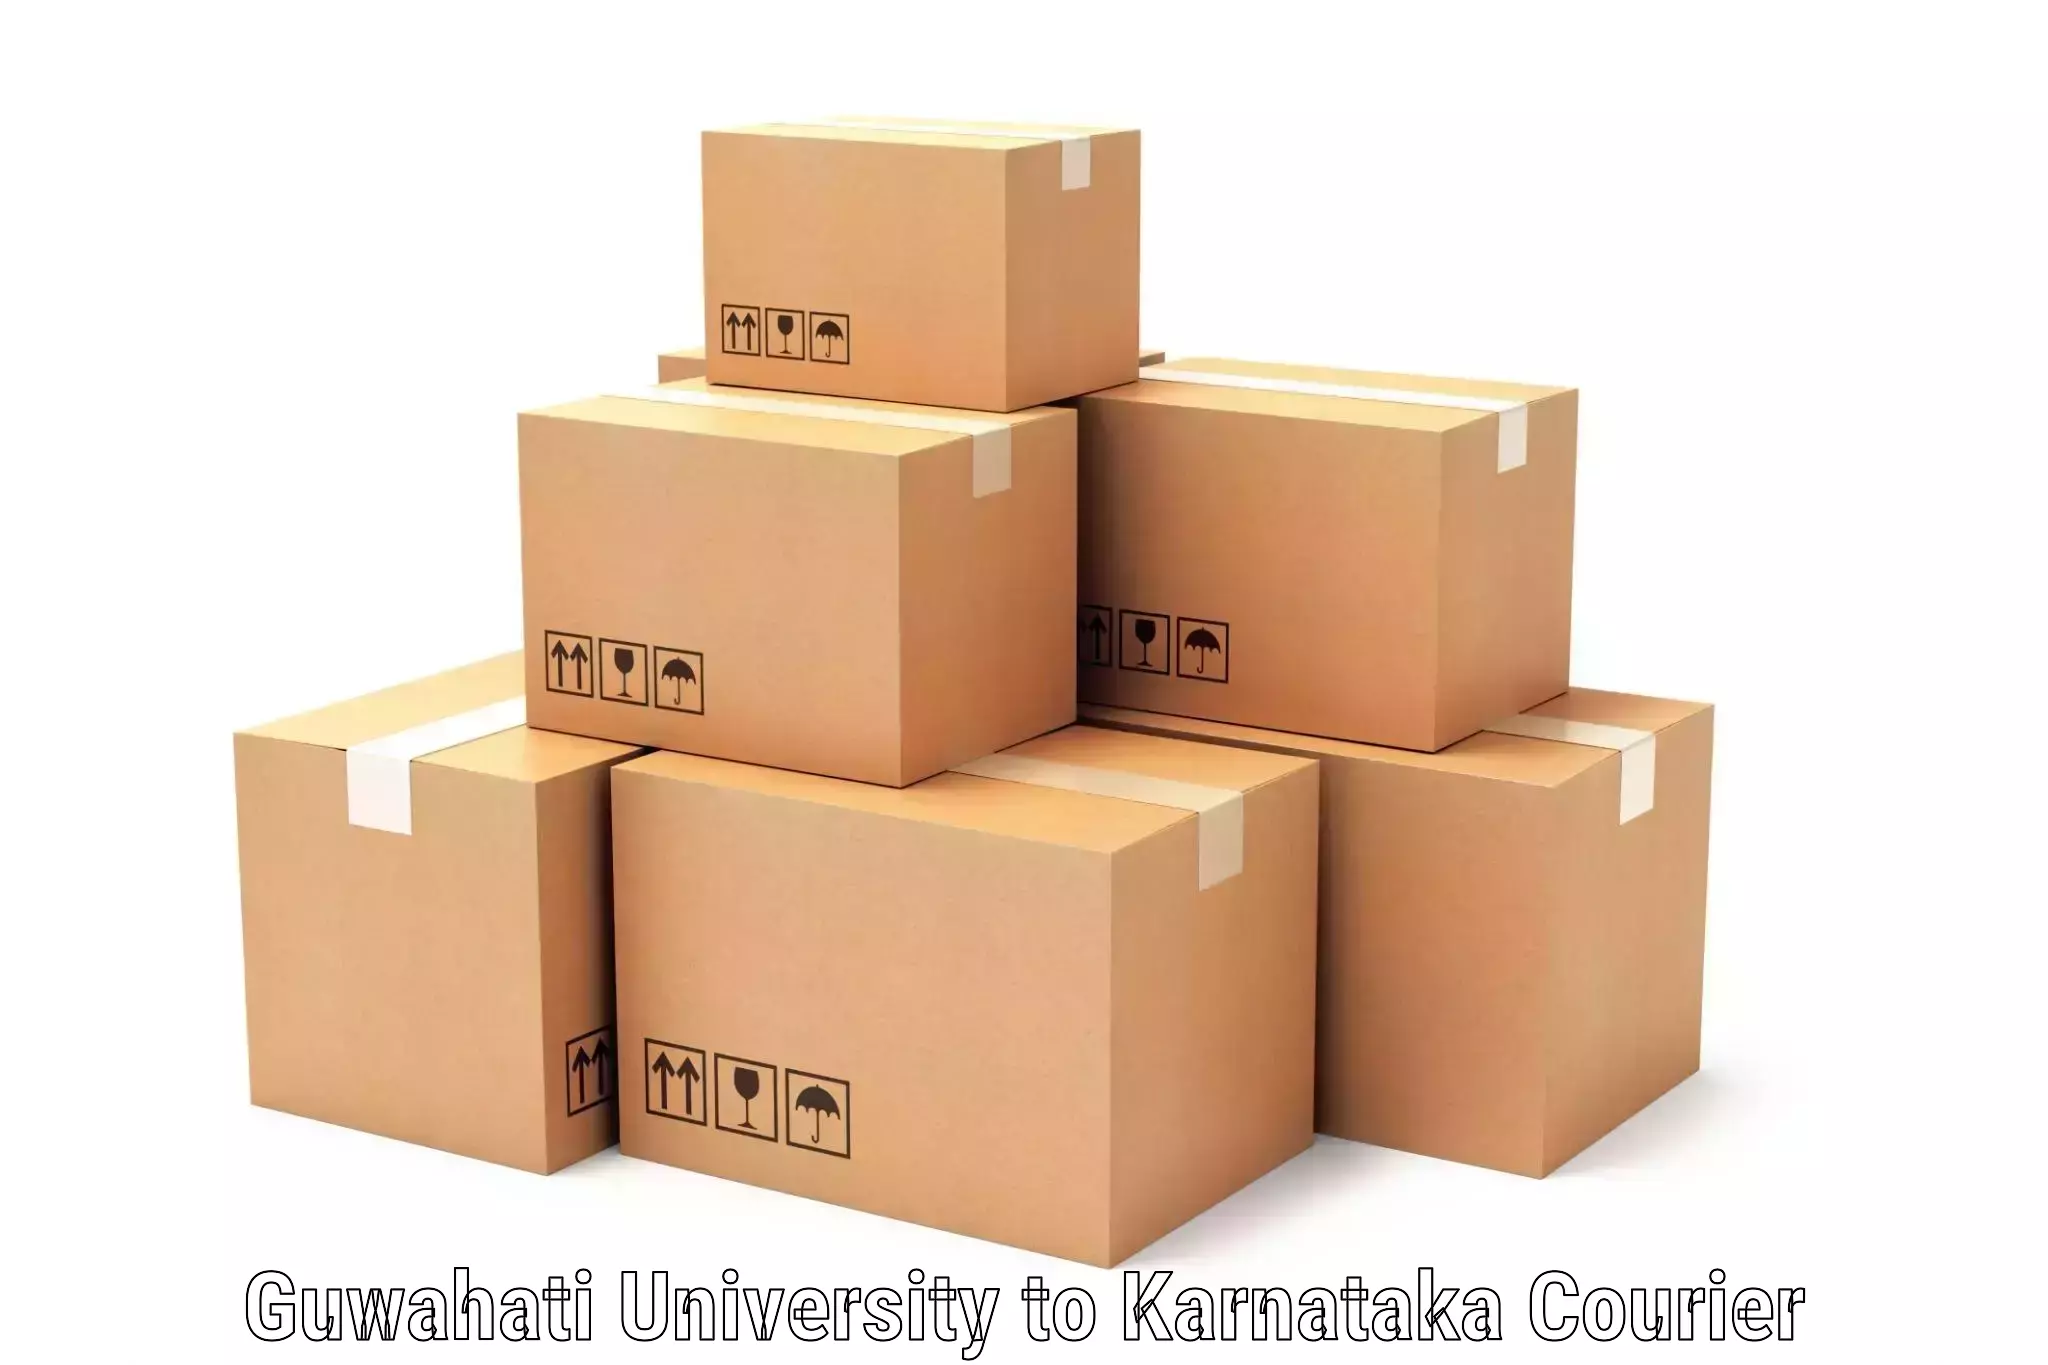 Advanced freight services in Guwahati University to Mangalore Port